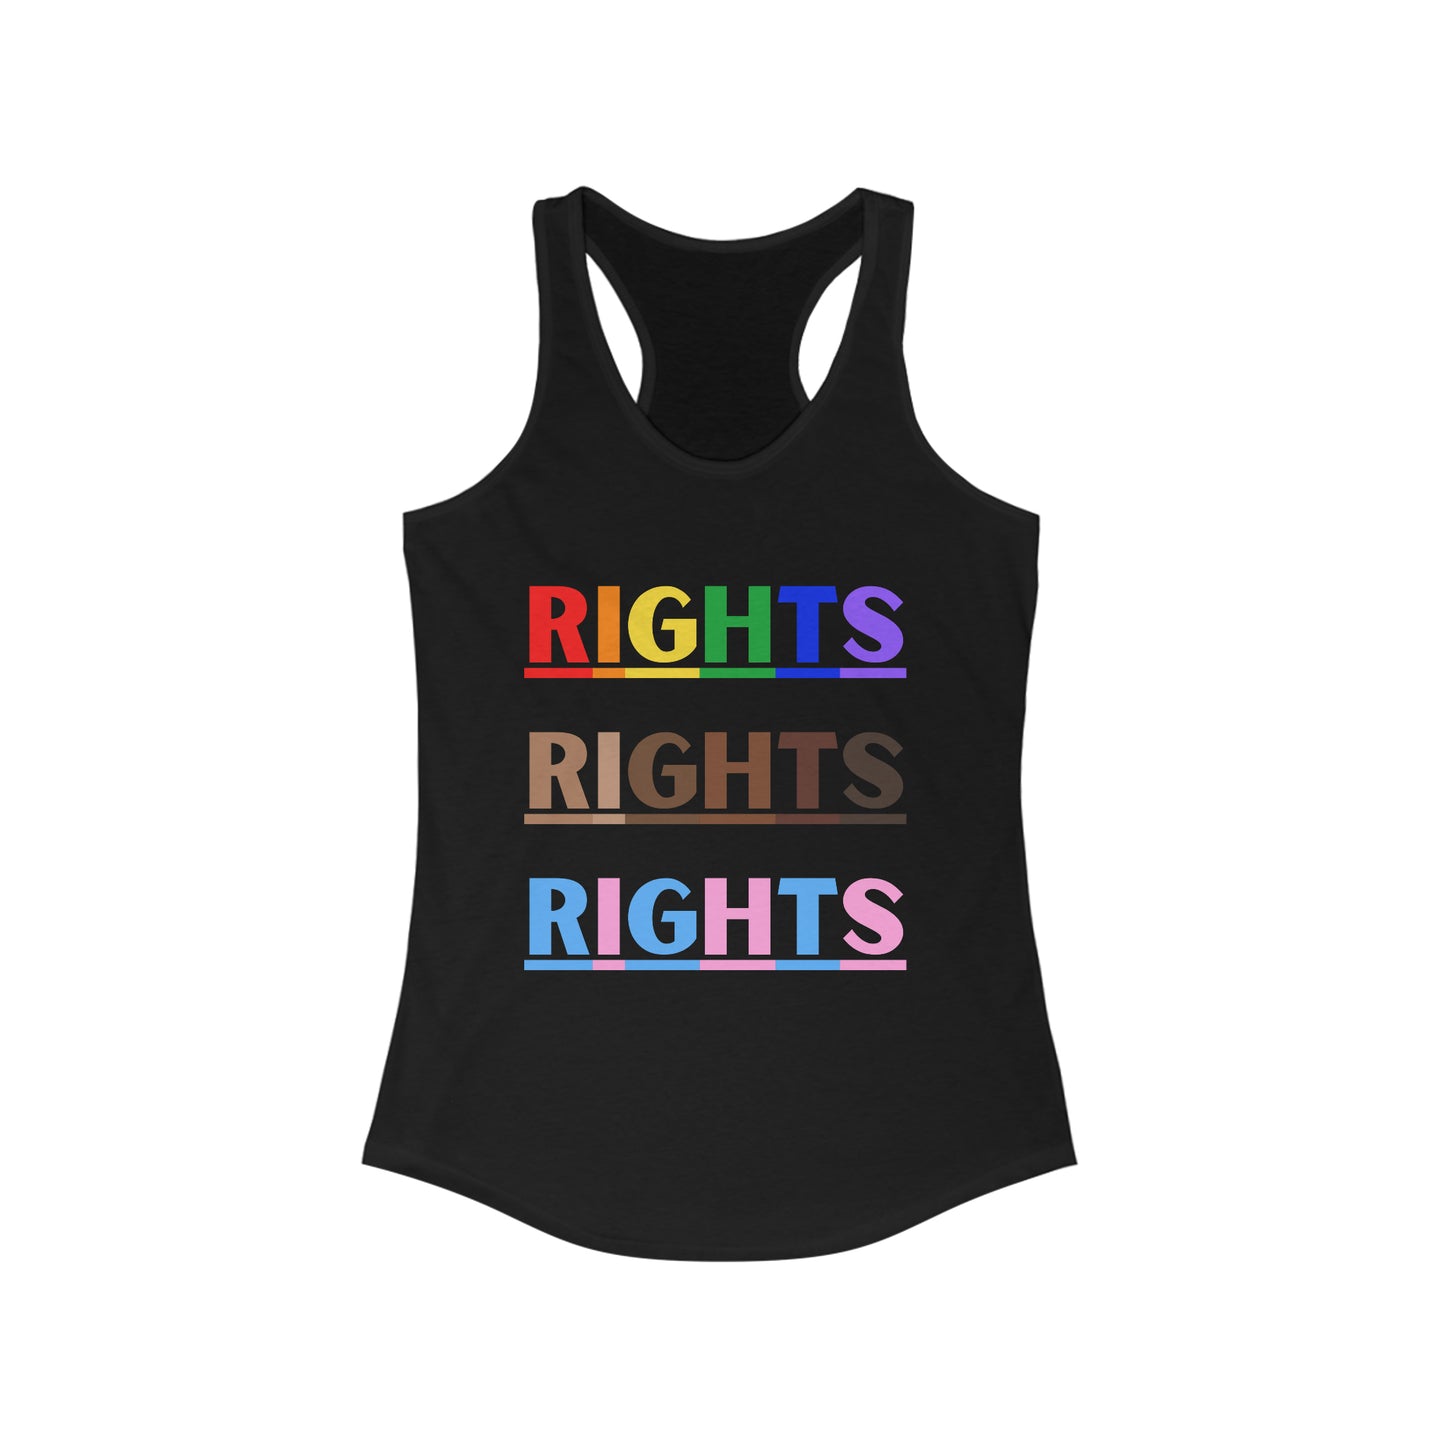 Rights, Rights, Rights Tank Tops